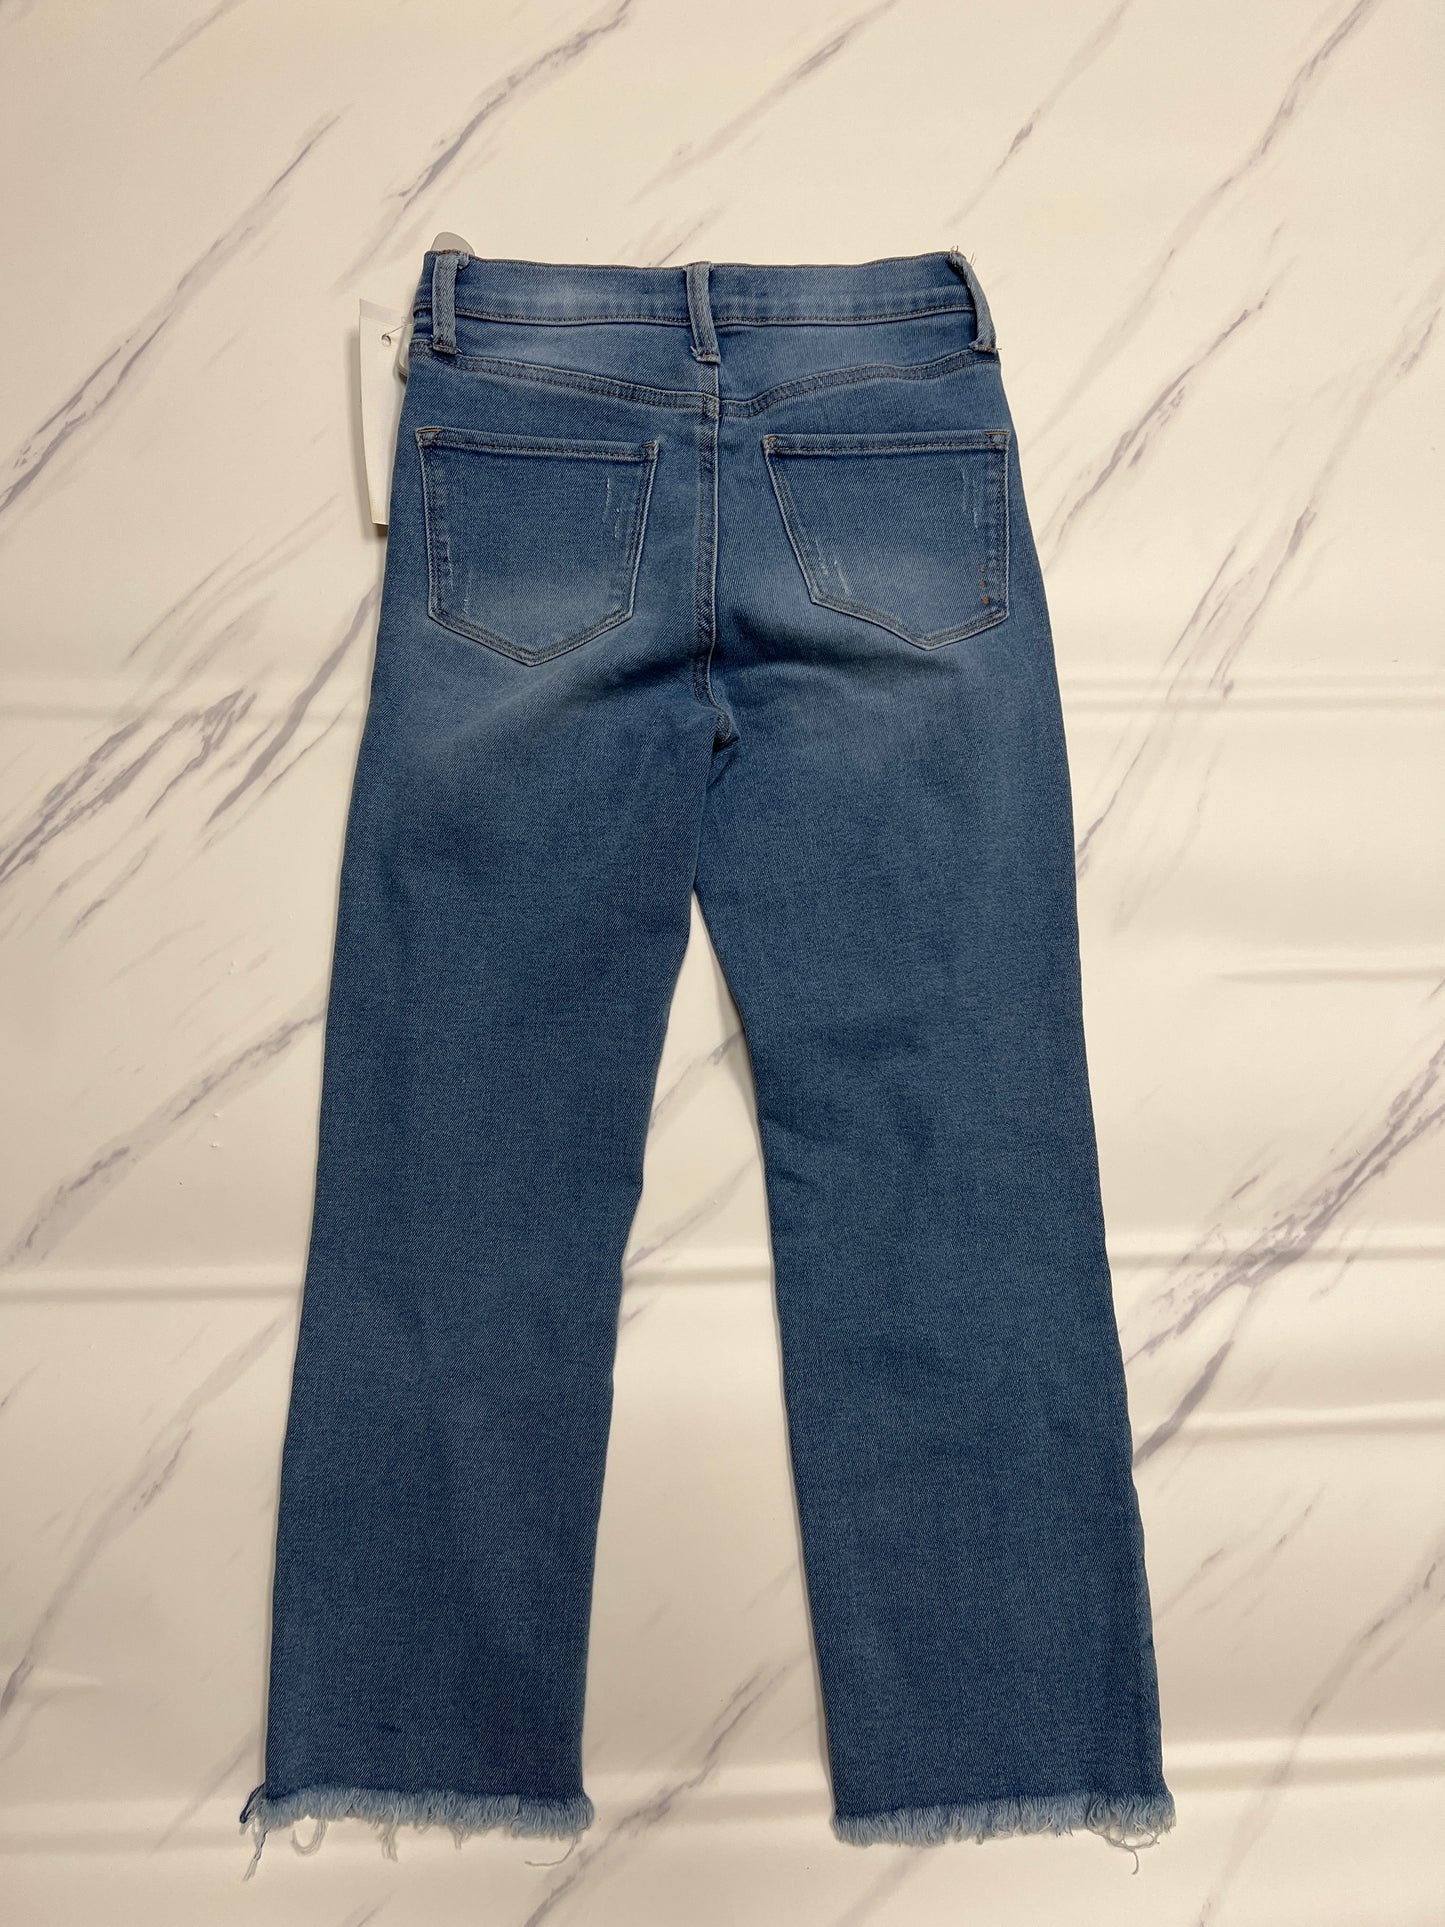 Jeans Cropped By Rachel Roy  Size: 4